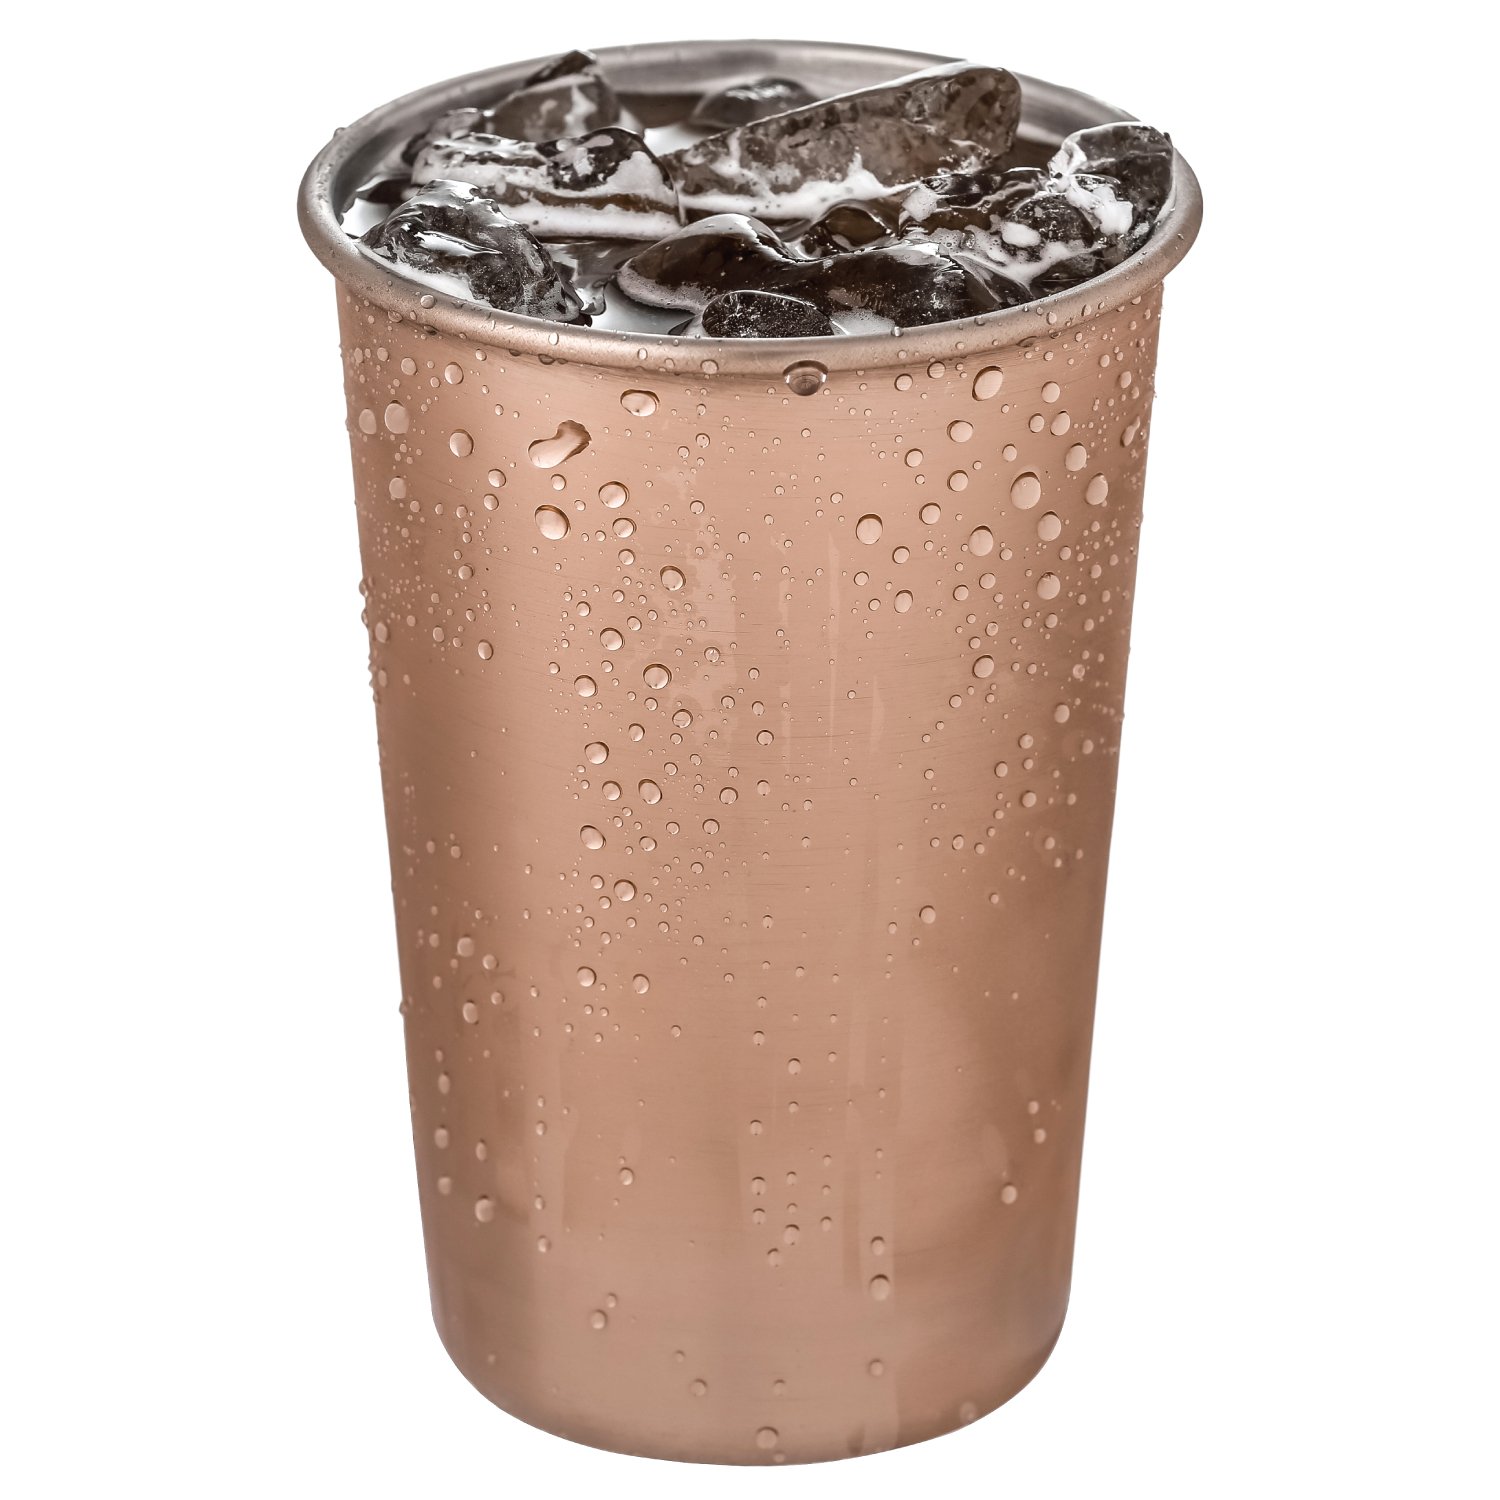 Thirsty Rhino Tenki, 16 oz Copper Plated Pint Cup Glass Tumbler Mug, Copper Plated (Set of 2)